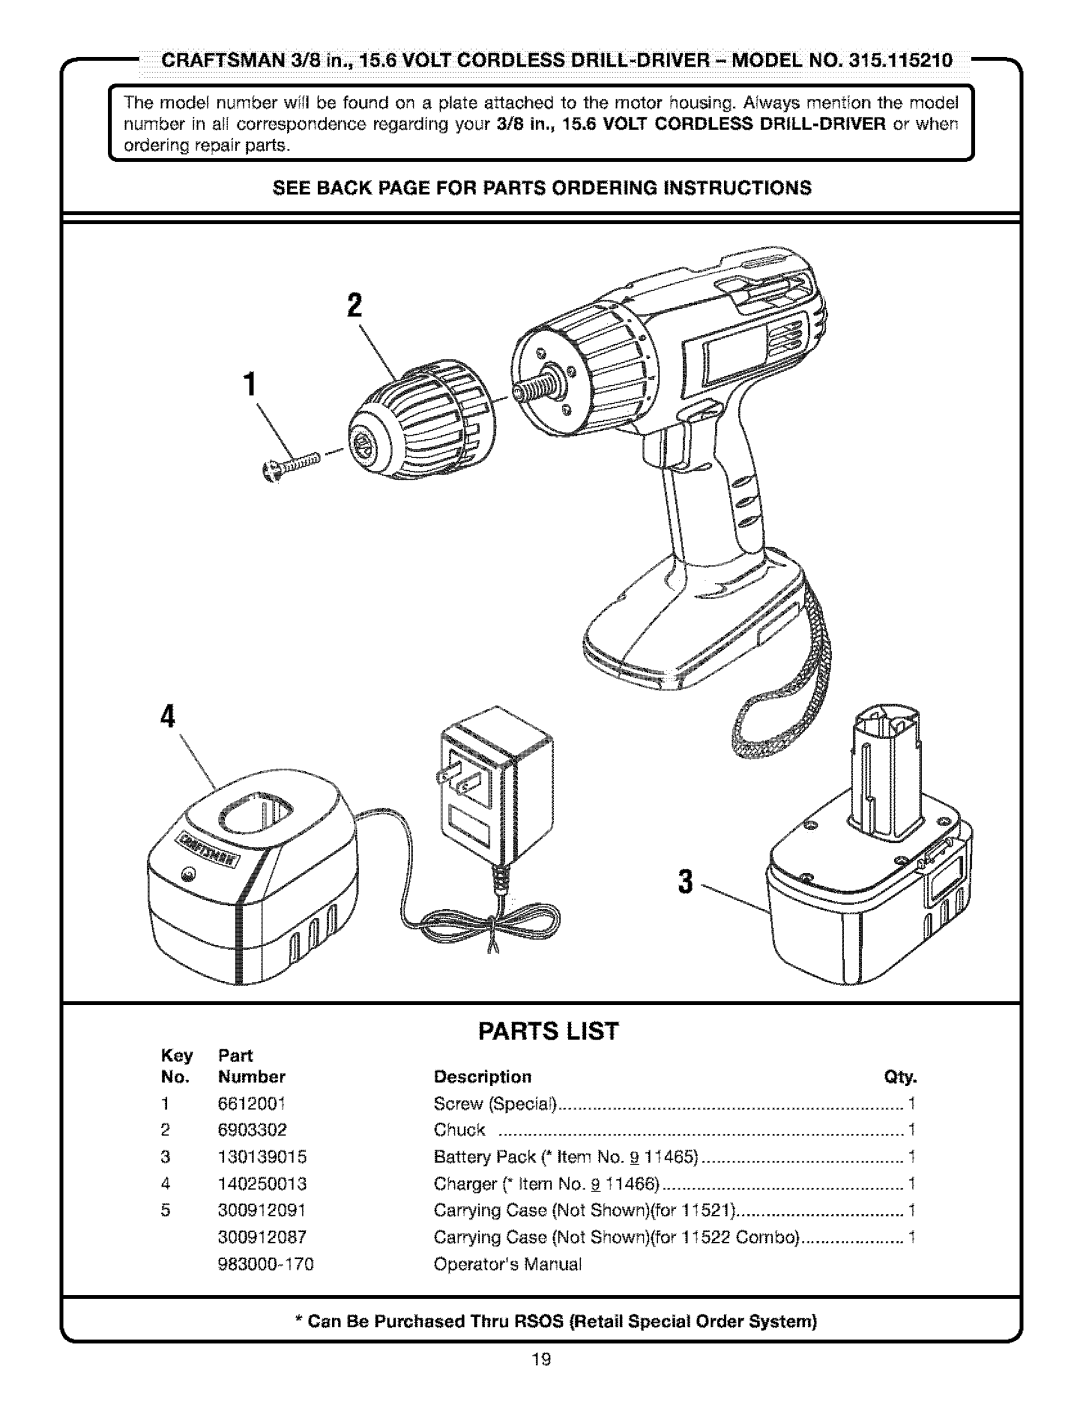 Craftsman 315.11521 manual Parts List, See Back Page For Parts Ordering Instructions, Number, Description 